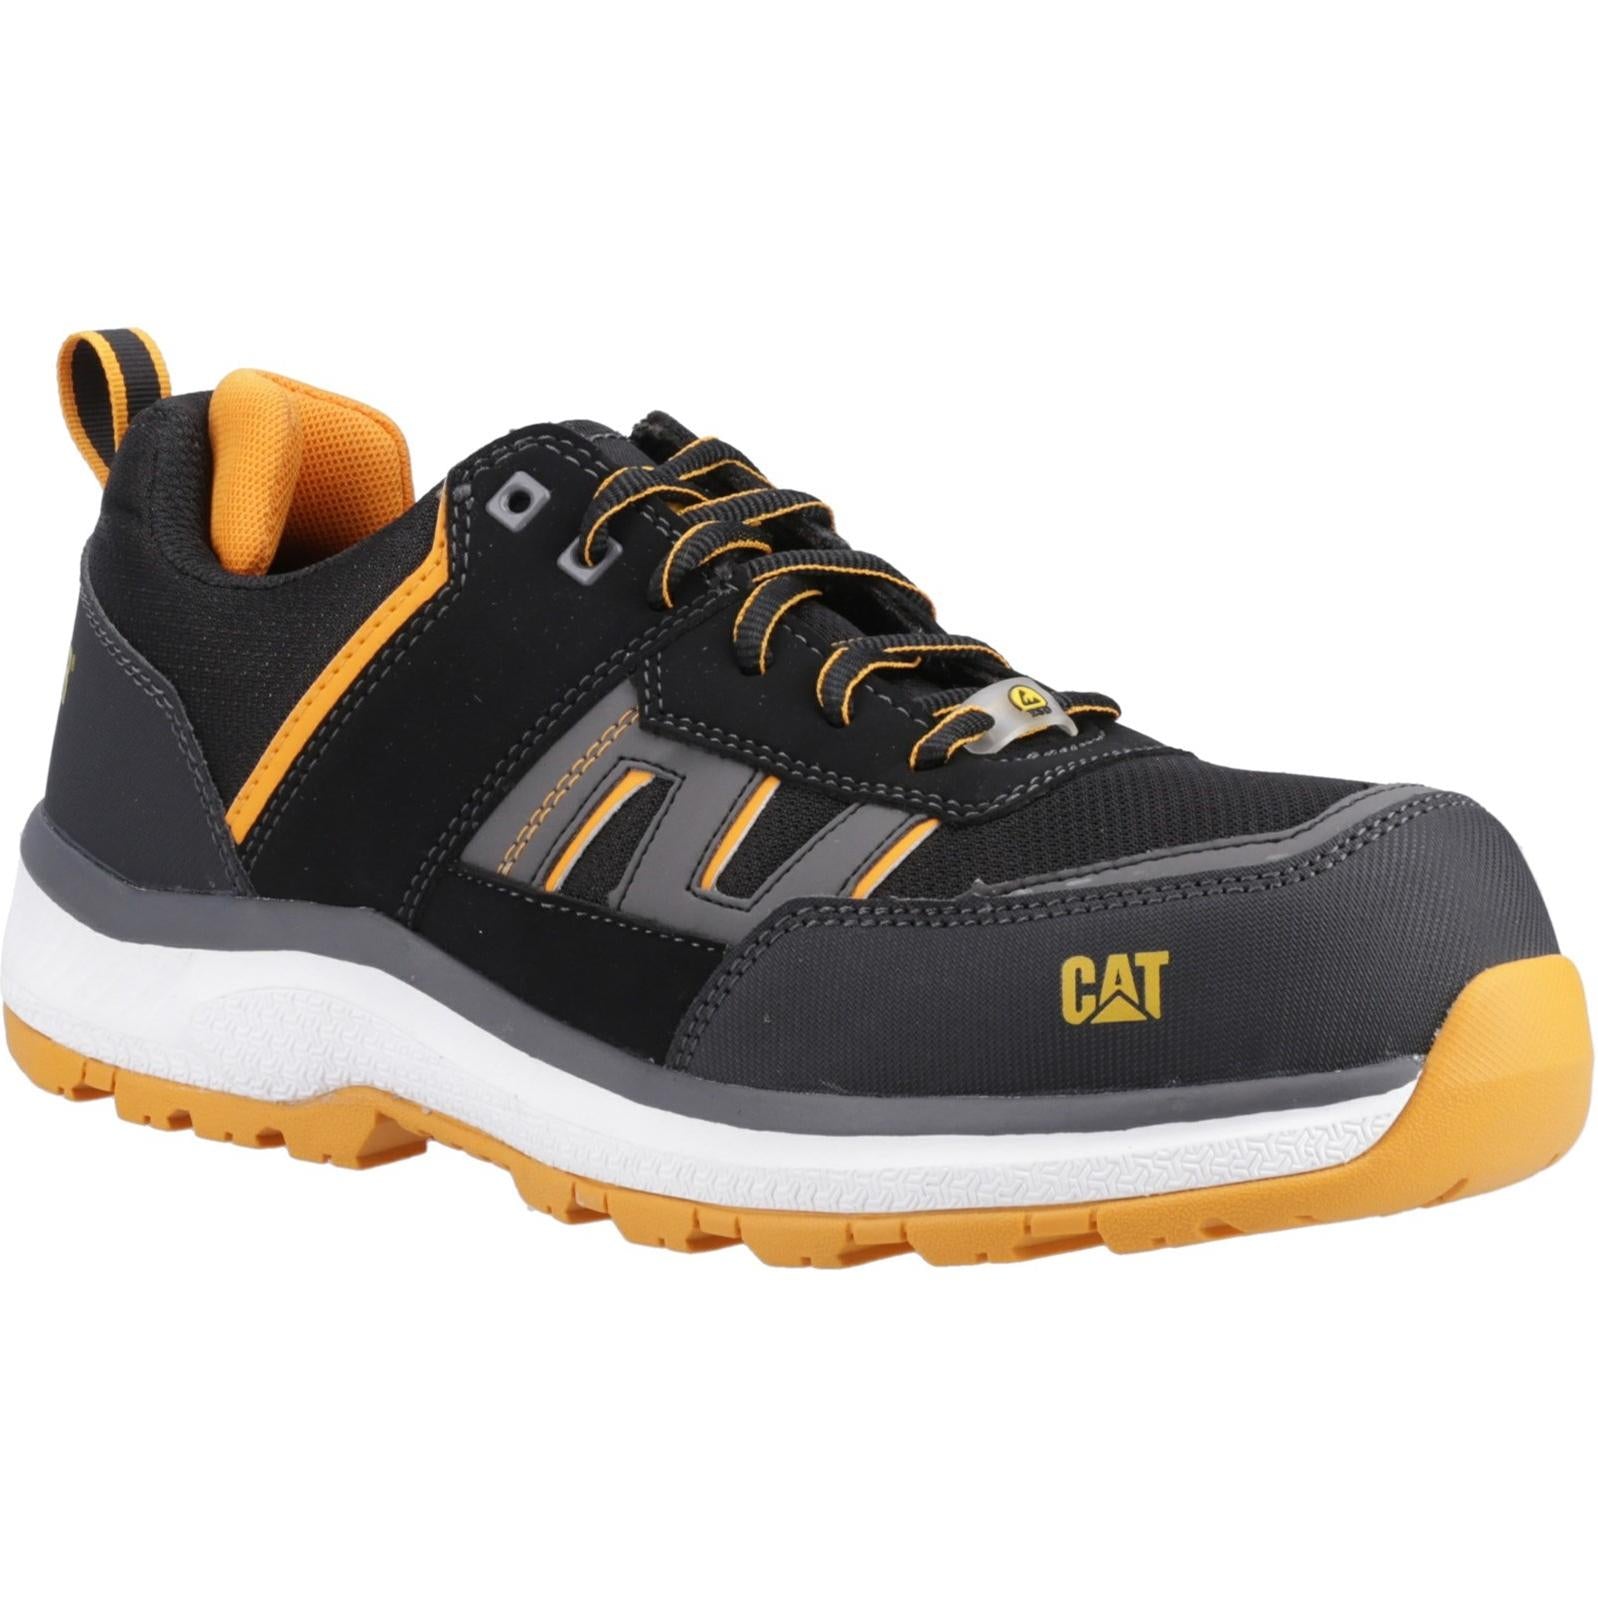 Cat Accelerate S3 Safety Trainer